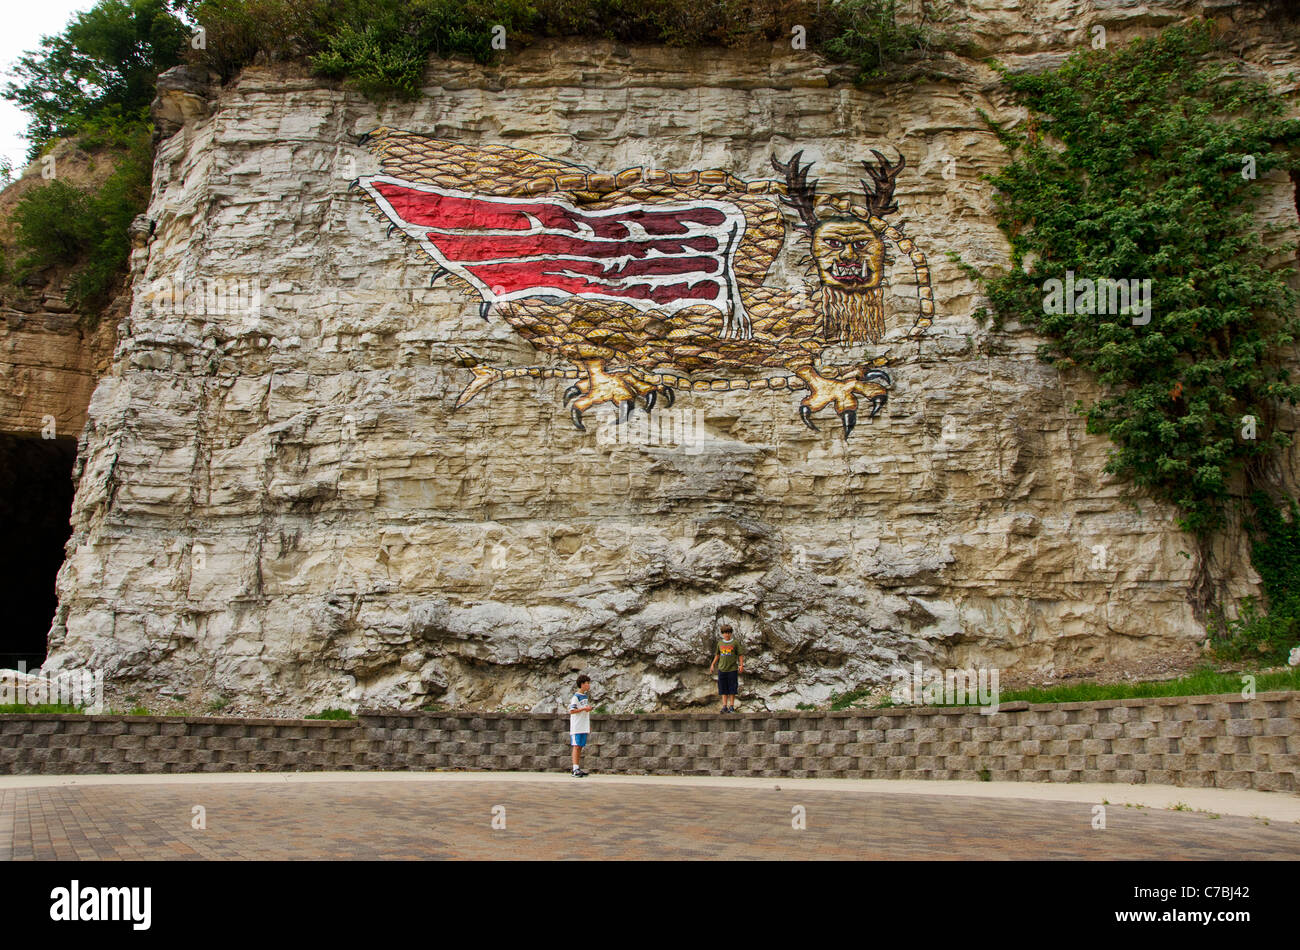 Boys looking at the painting of the Piasa bird on the cliffs beside the Mississippi River near Alton, Illinois Stock Photo